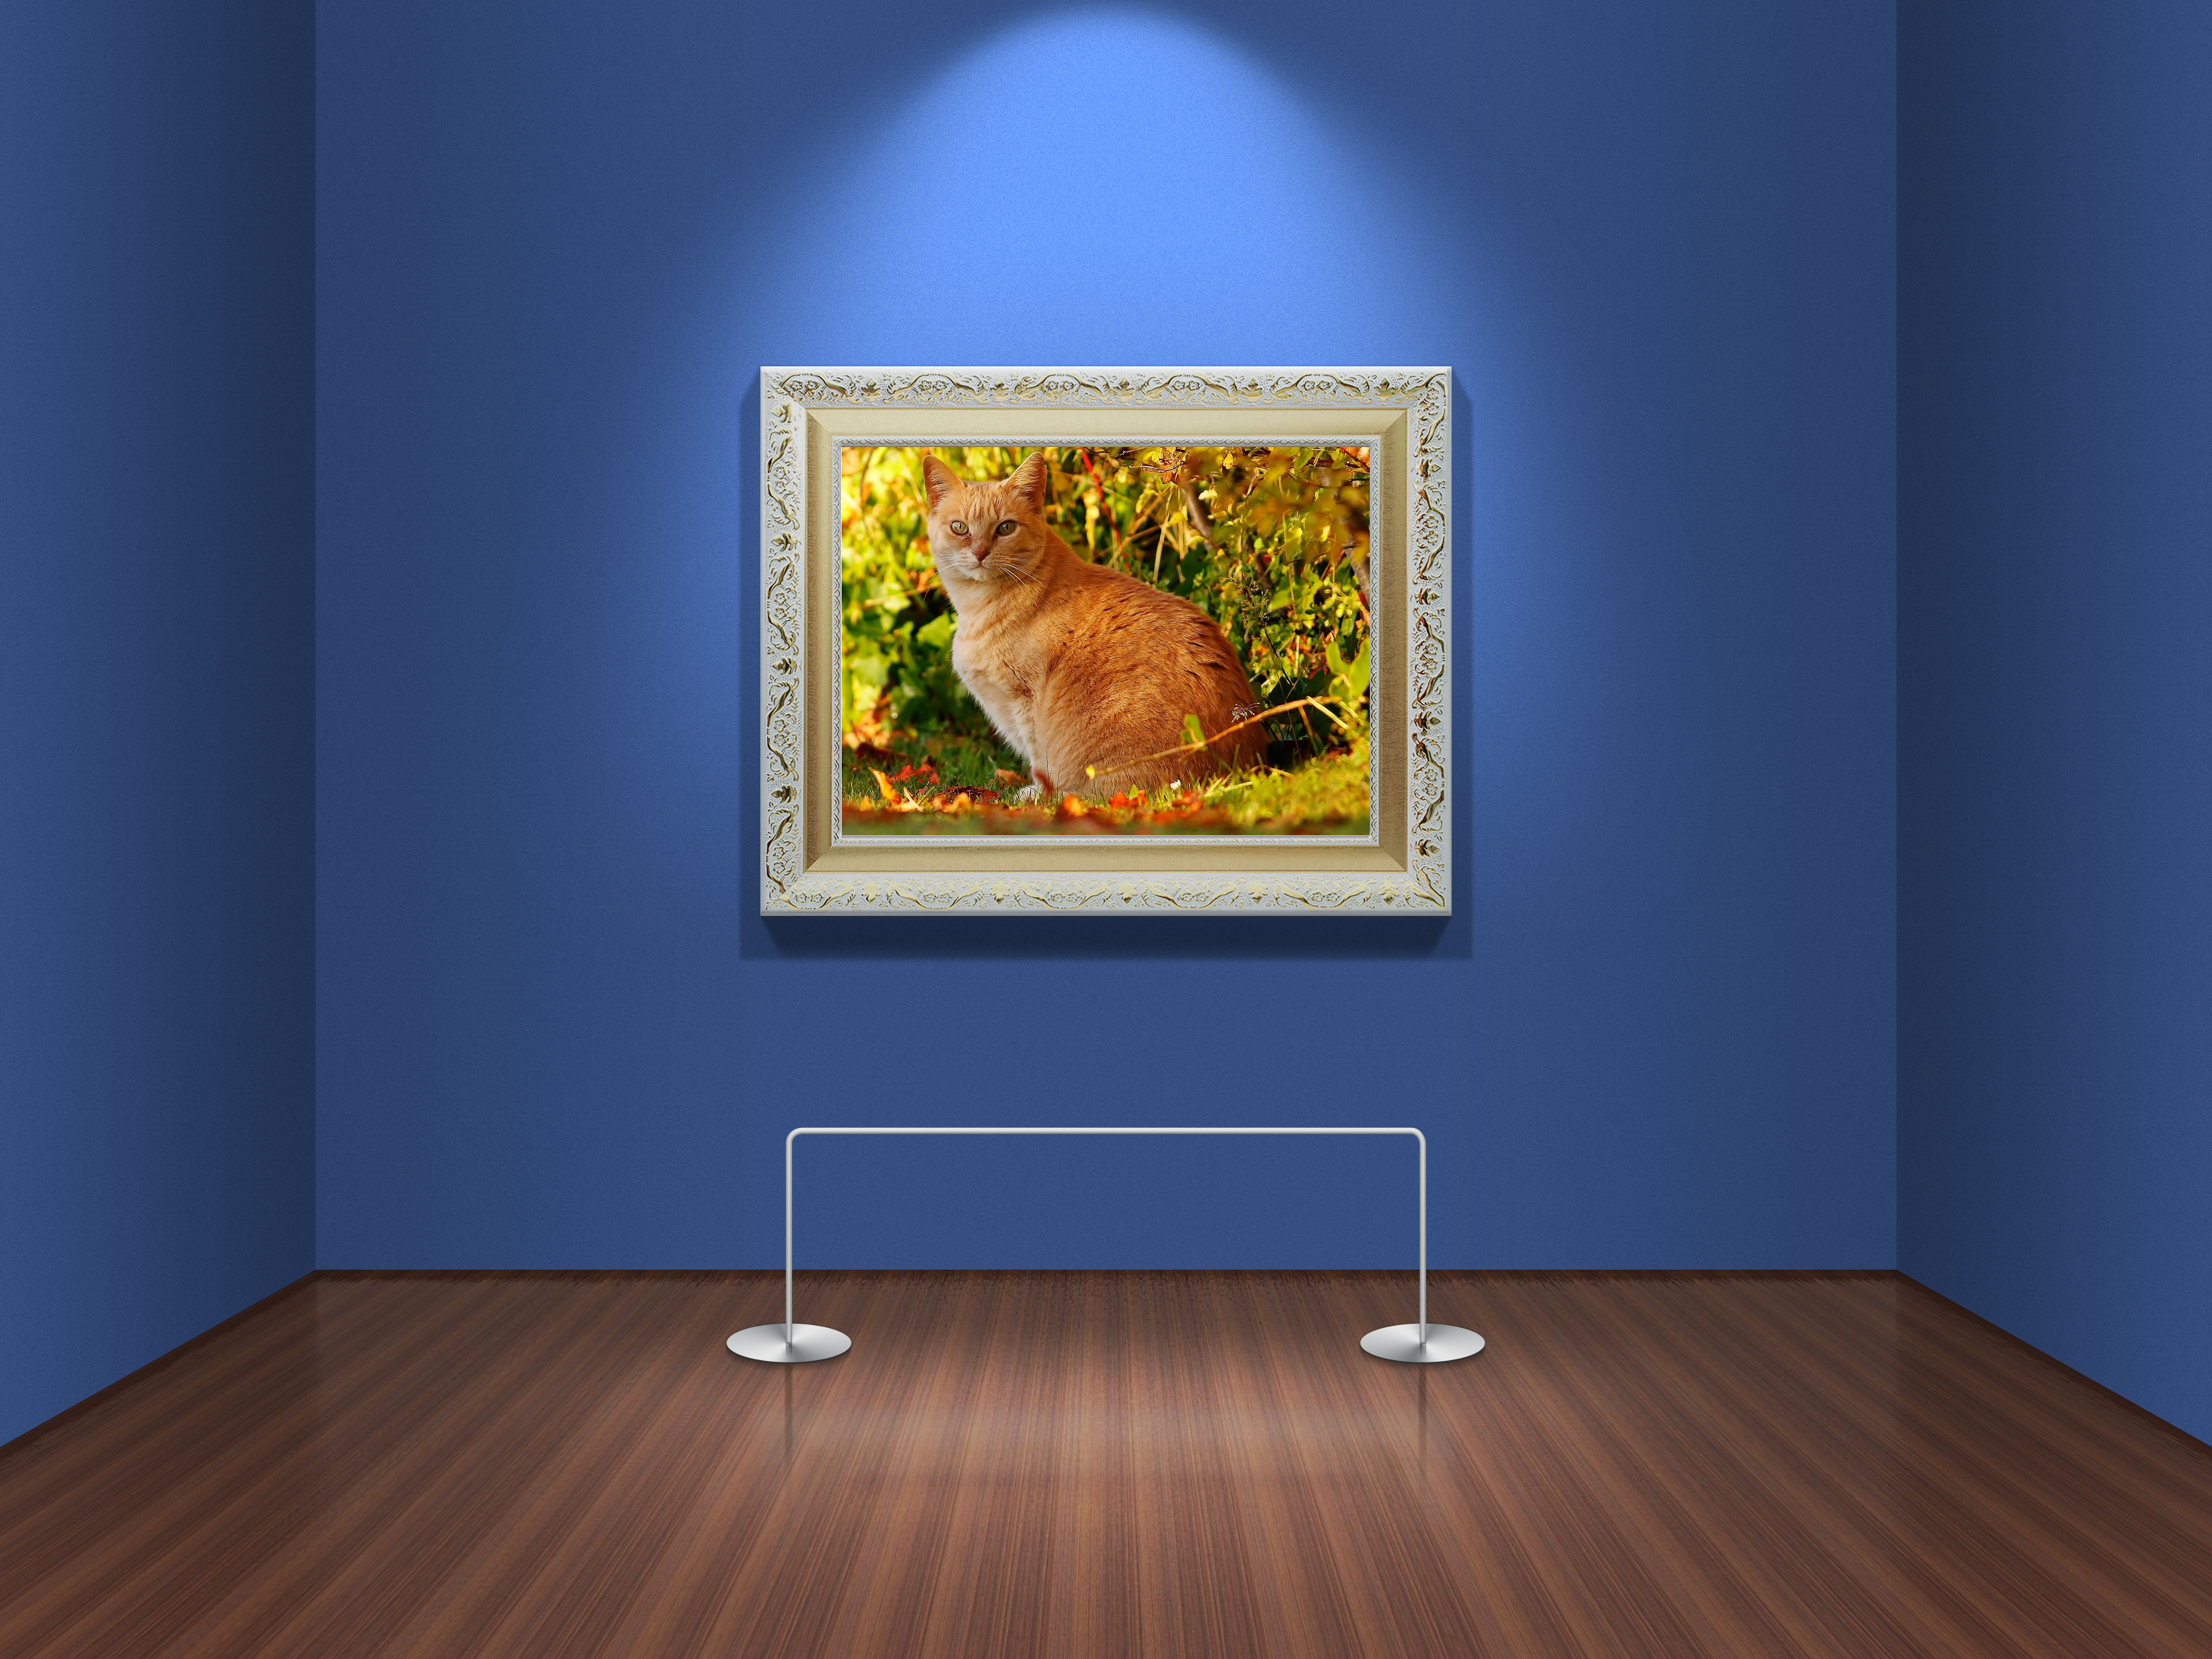 General 3840x2880 art gallery picture frames room cats picture